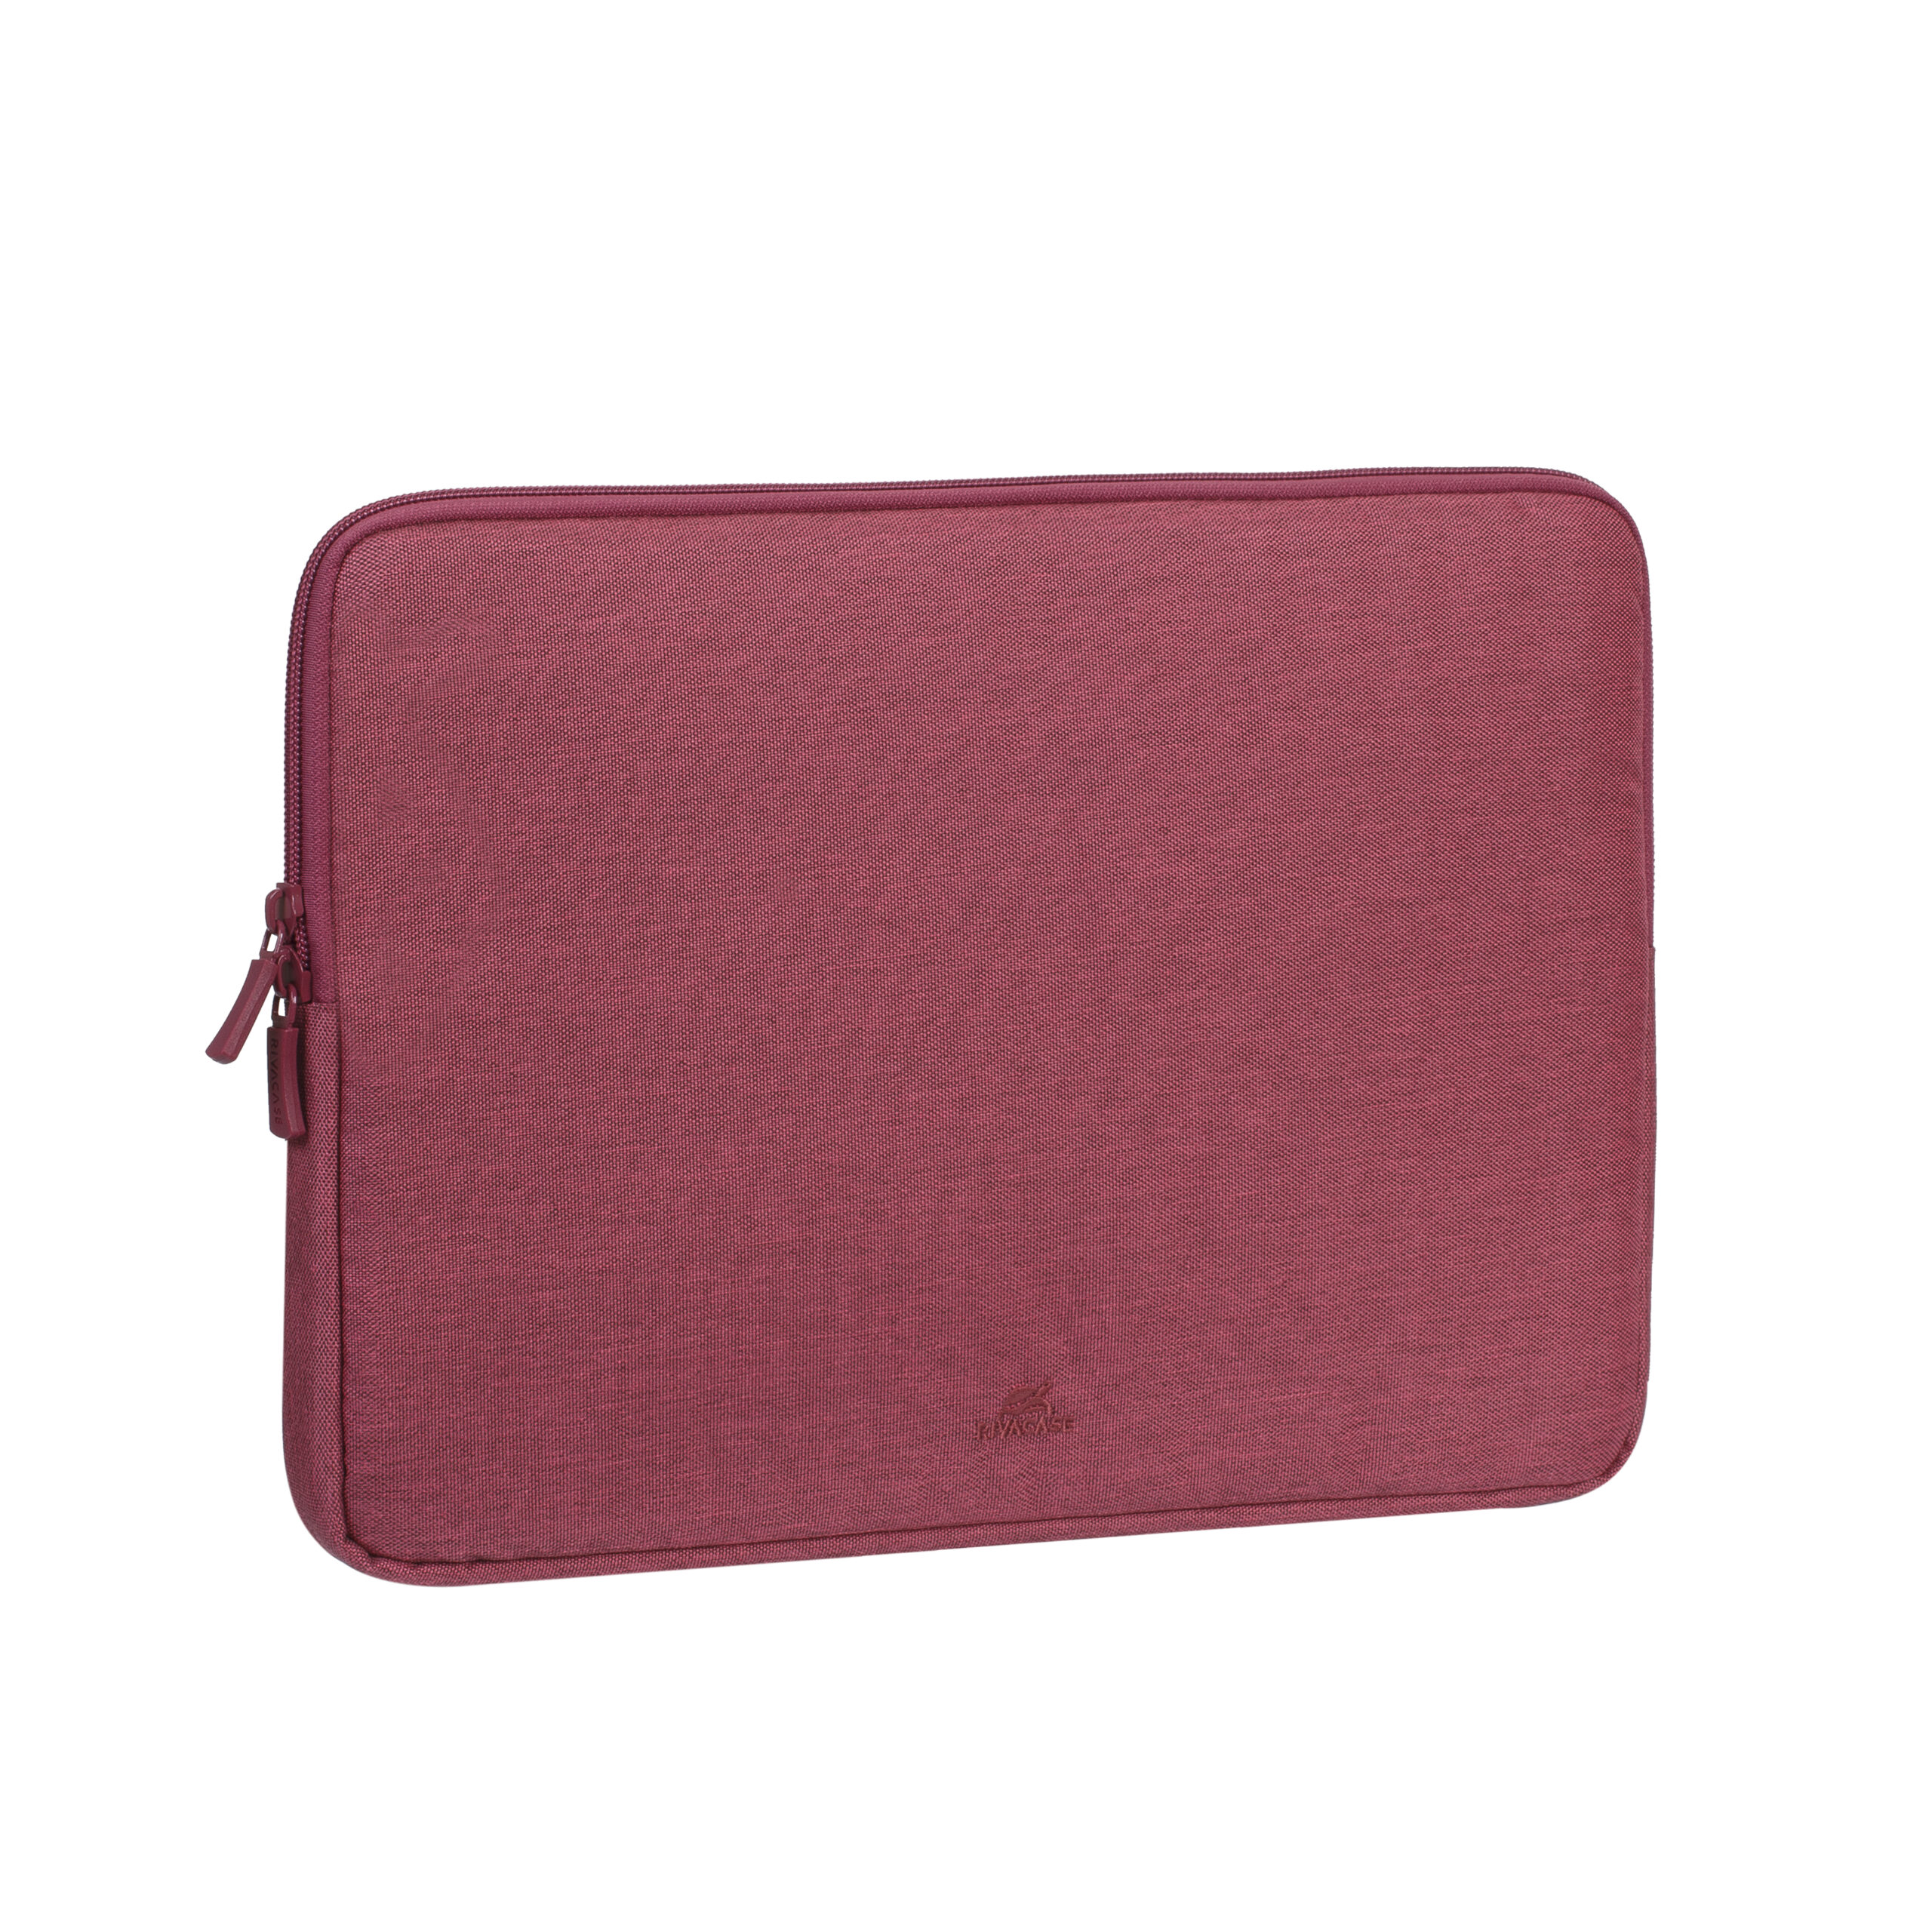 RIVACASE 7704 red Laptop sleeve 13.3-14″ / 12